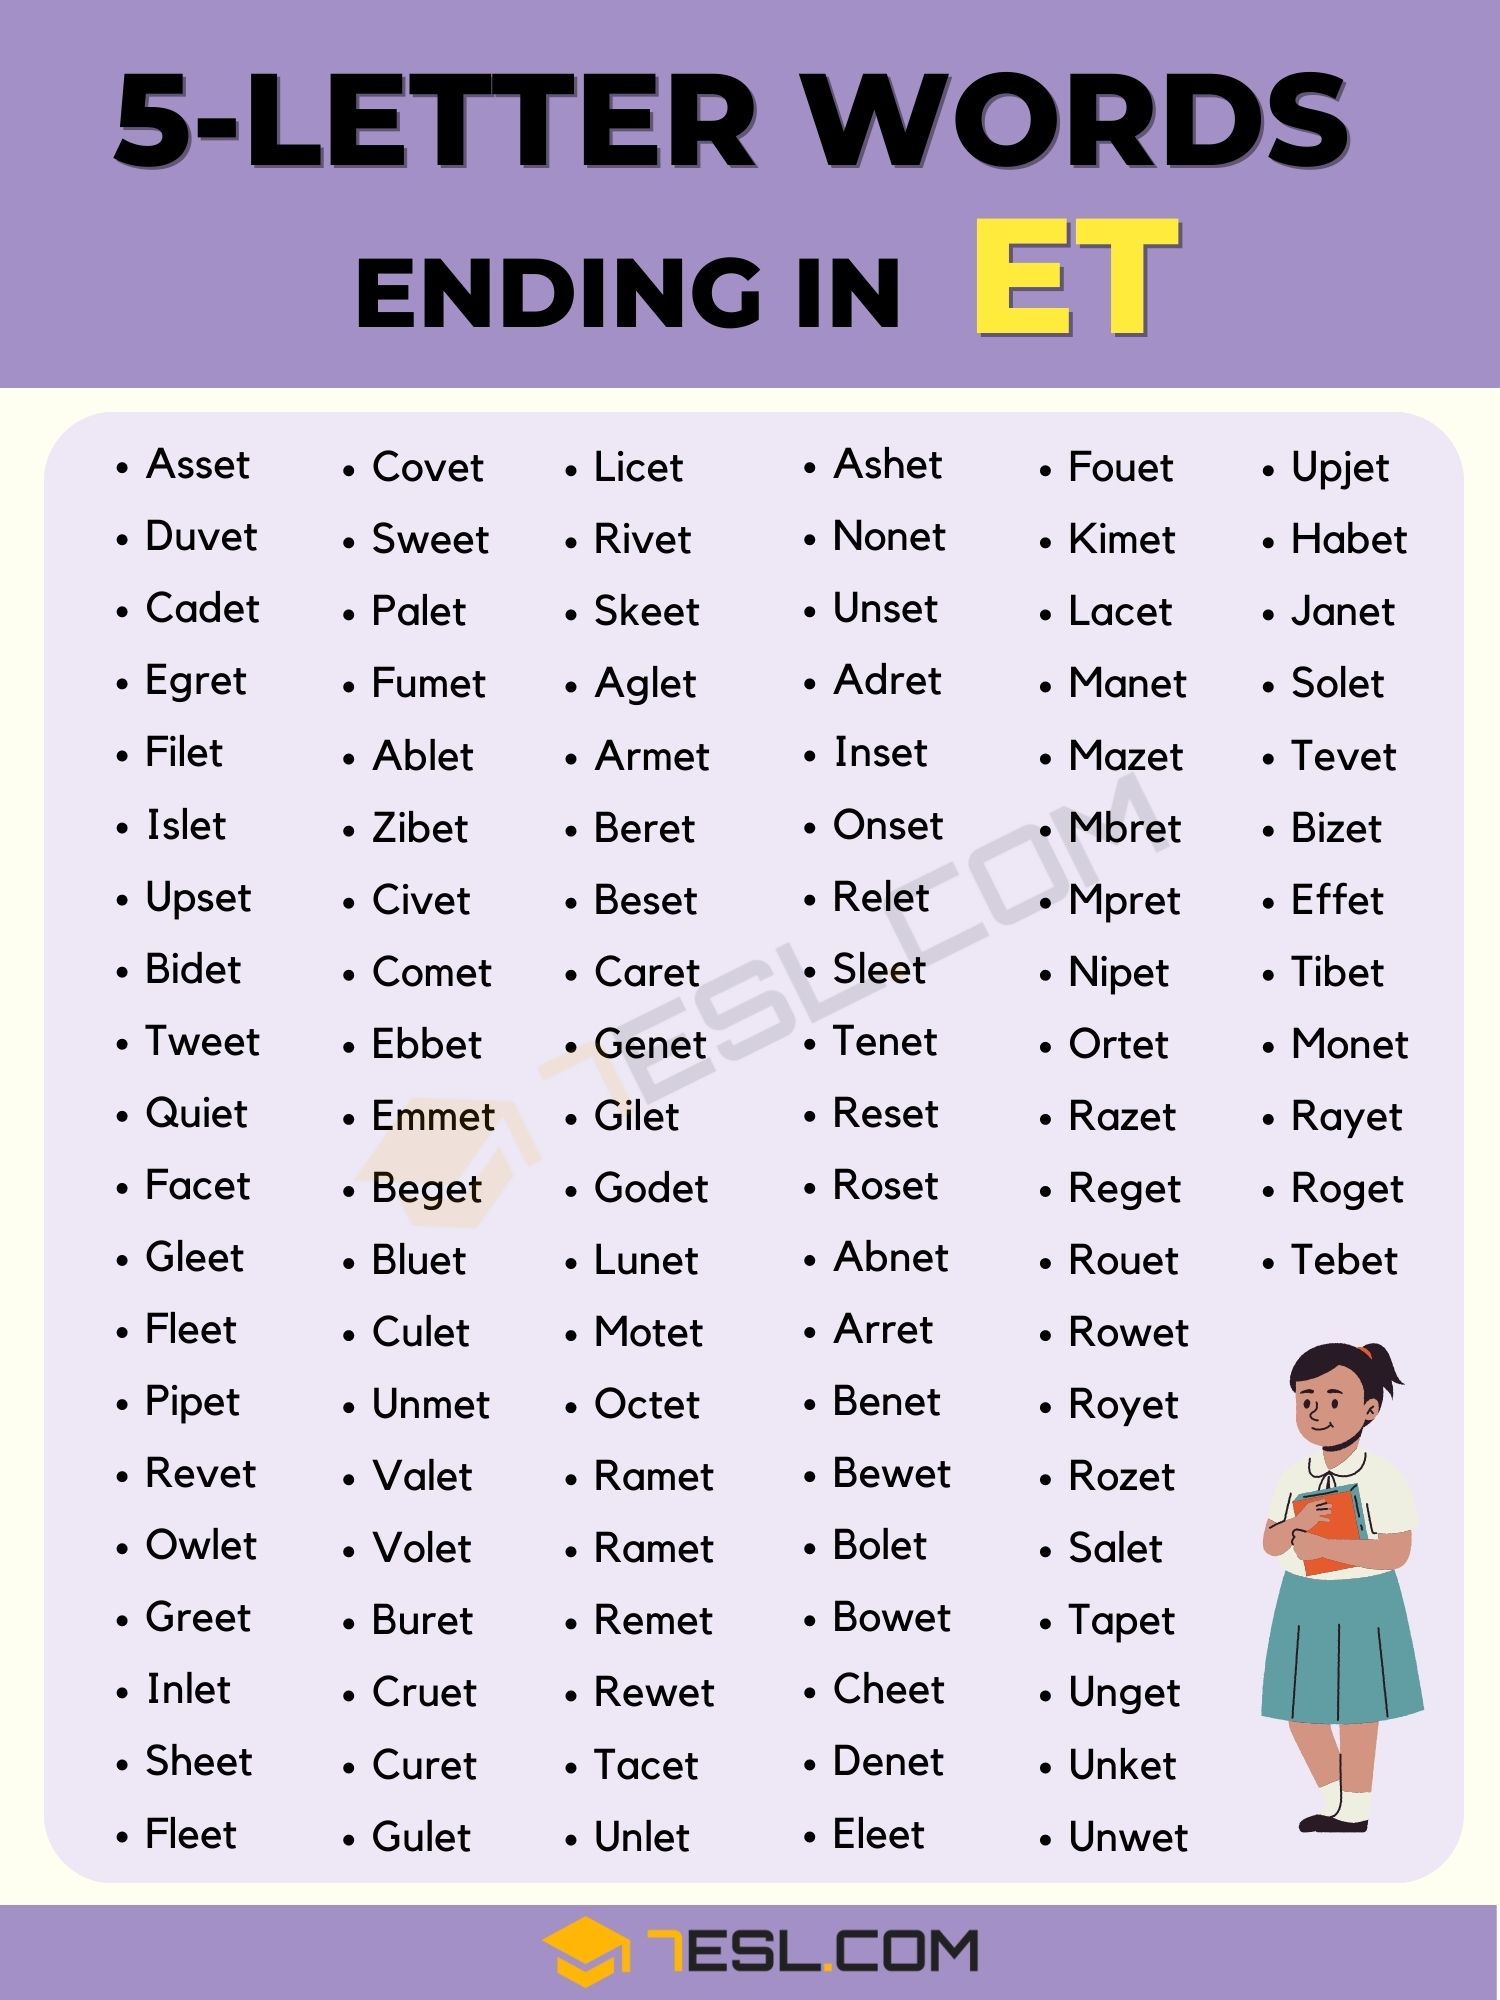 five letter word ending in e t